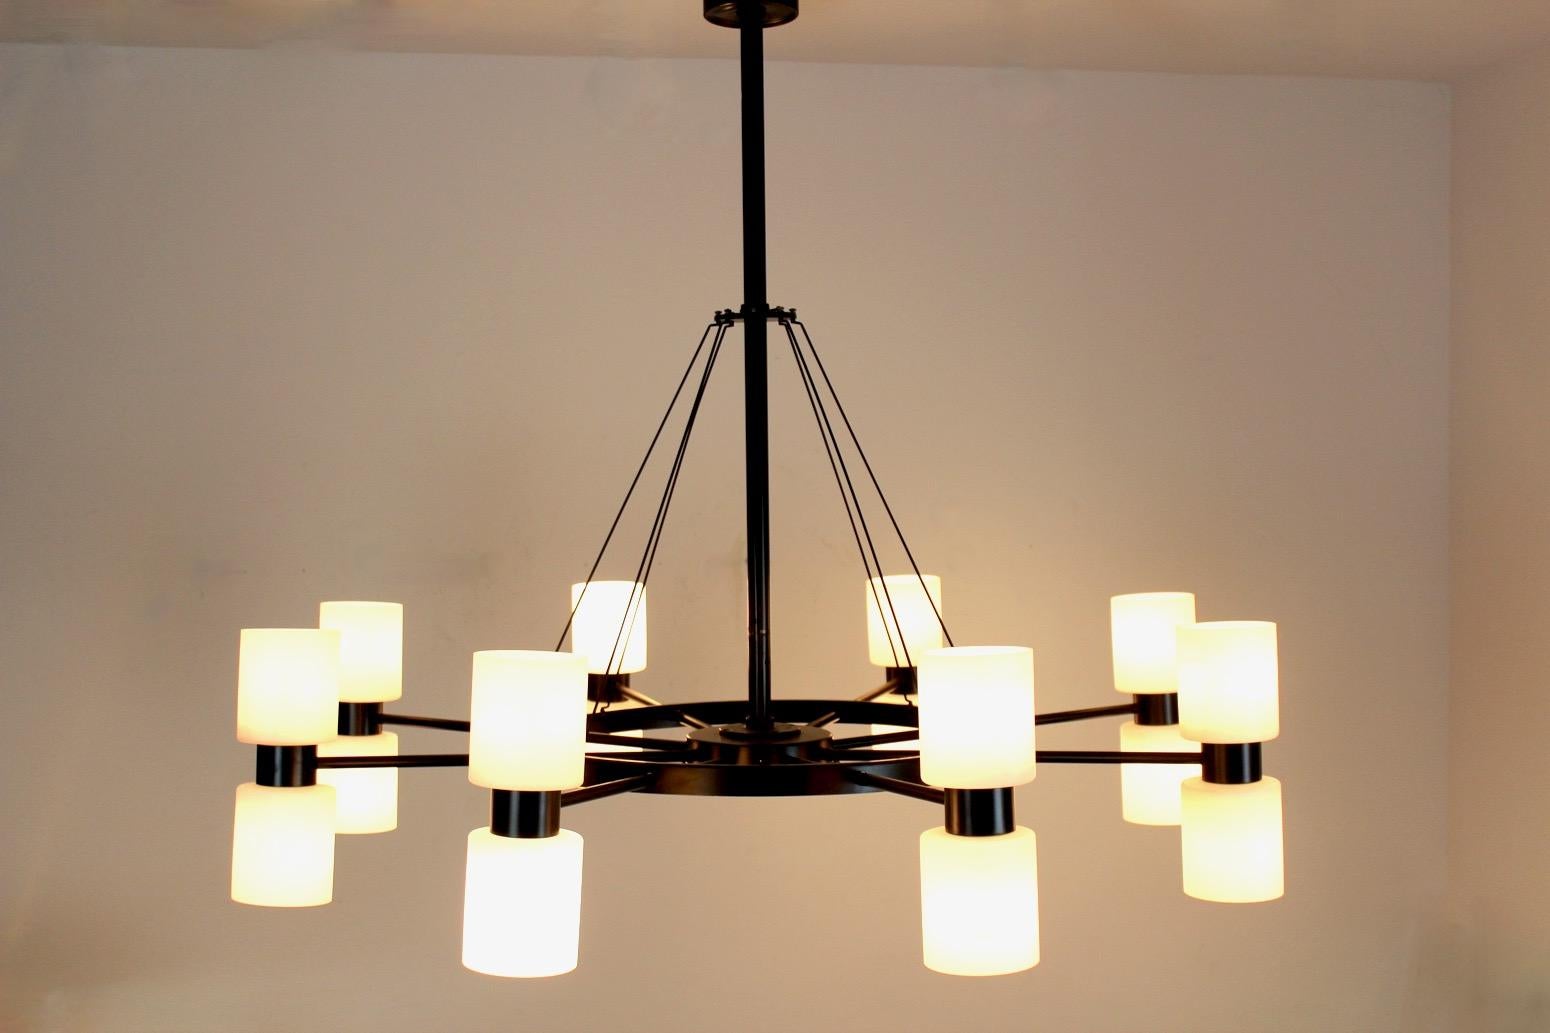 Exceptional 16-Light Chandelier 'Zonnewende' by J.W. Bosman for RAAK Amsterdam For Sale 2